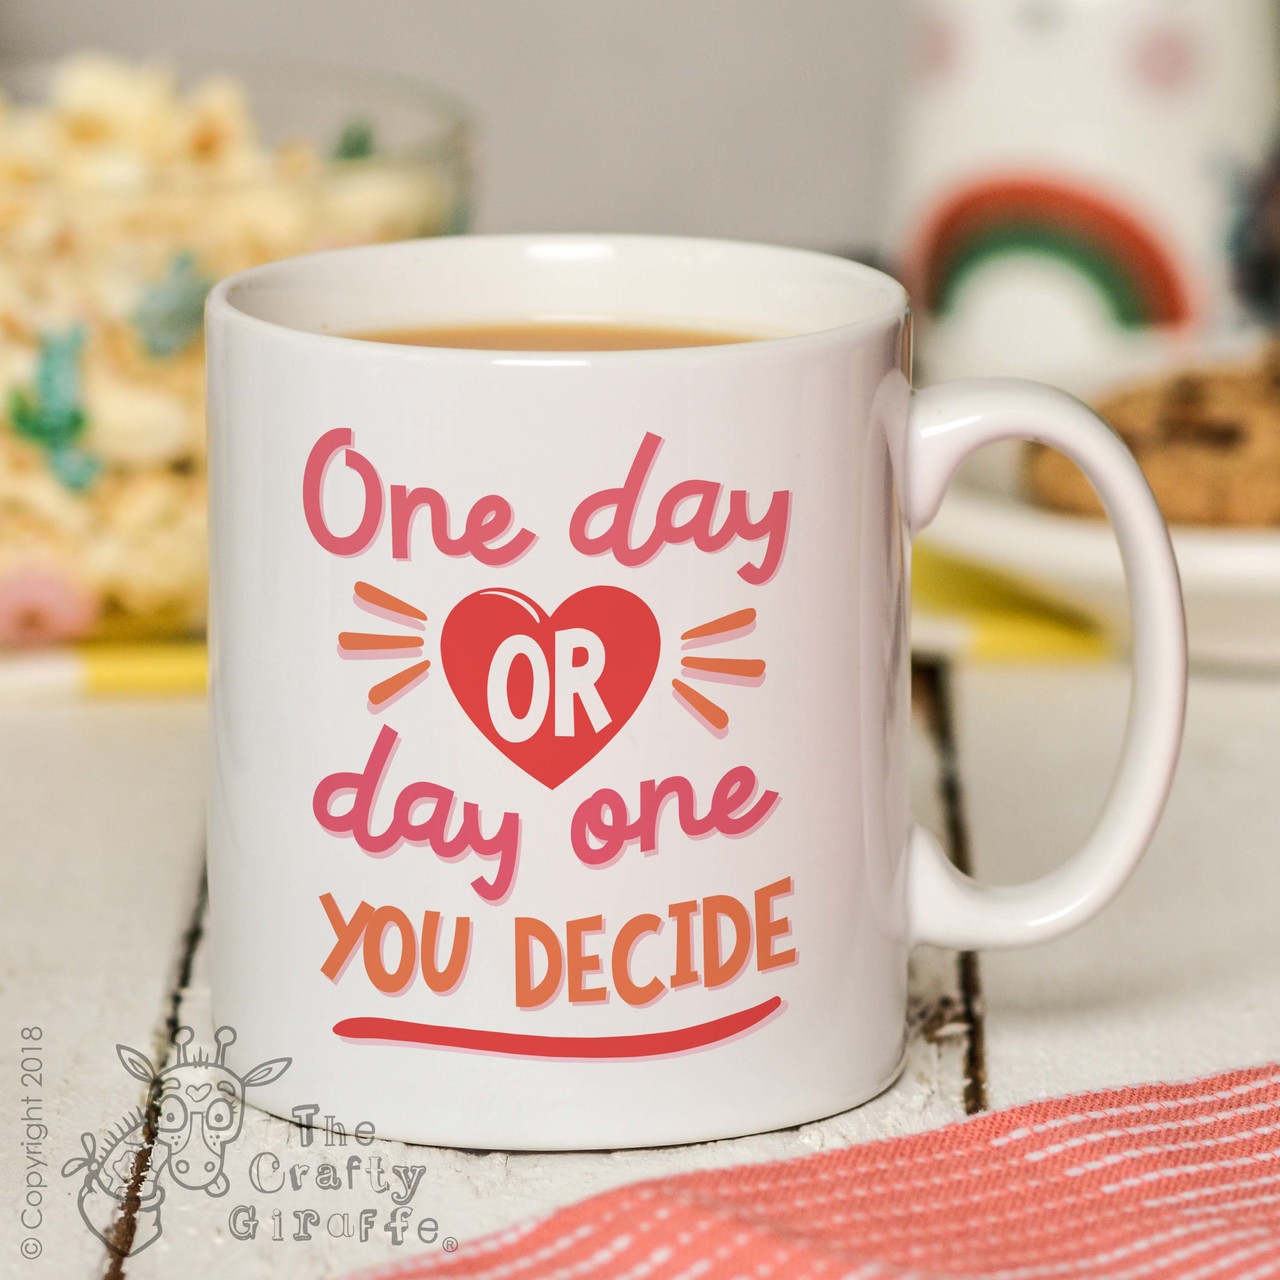 One day or day one you decide Mug